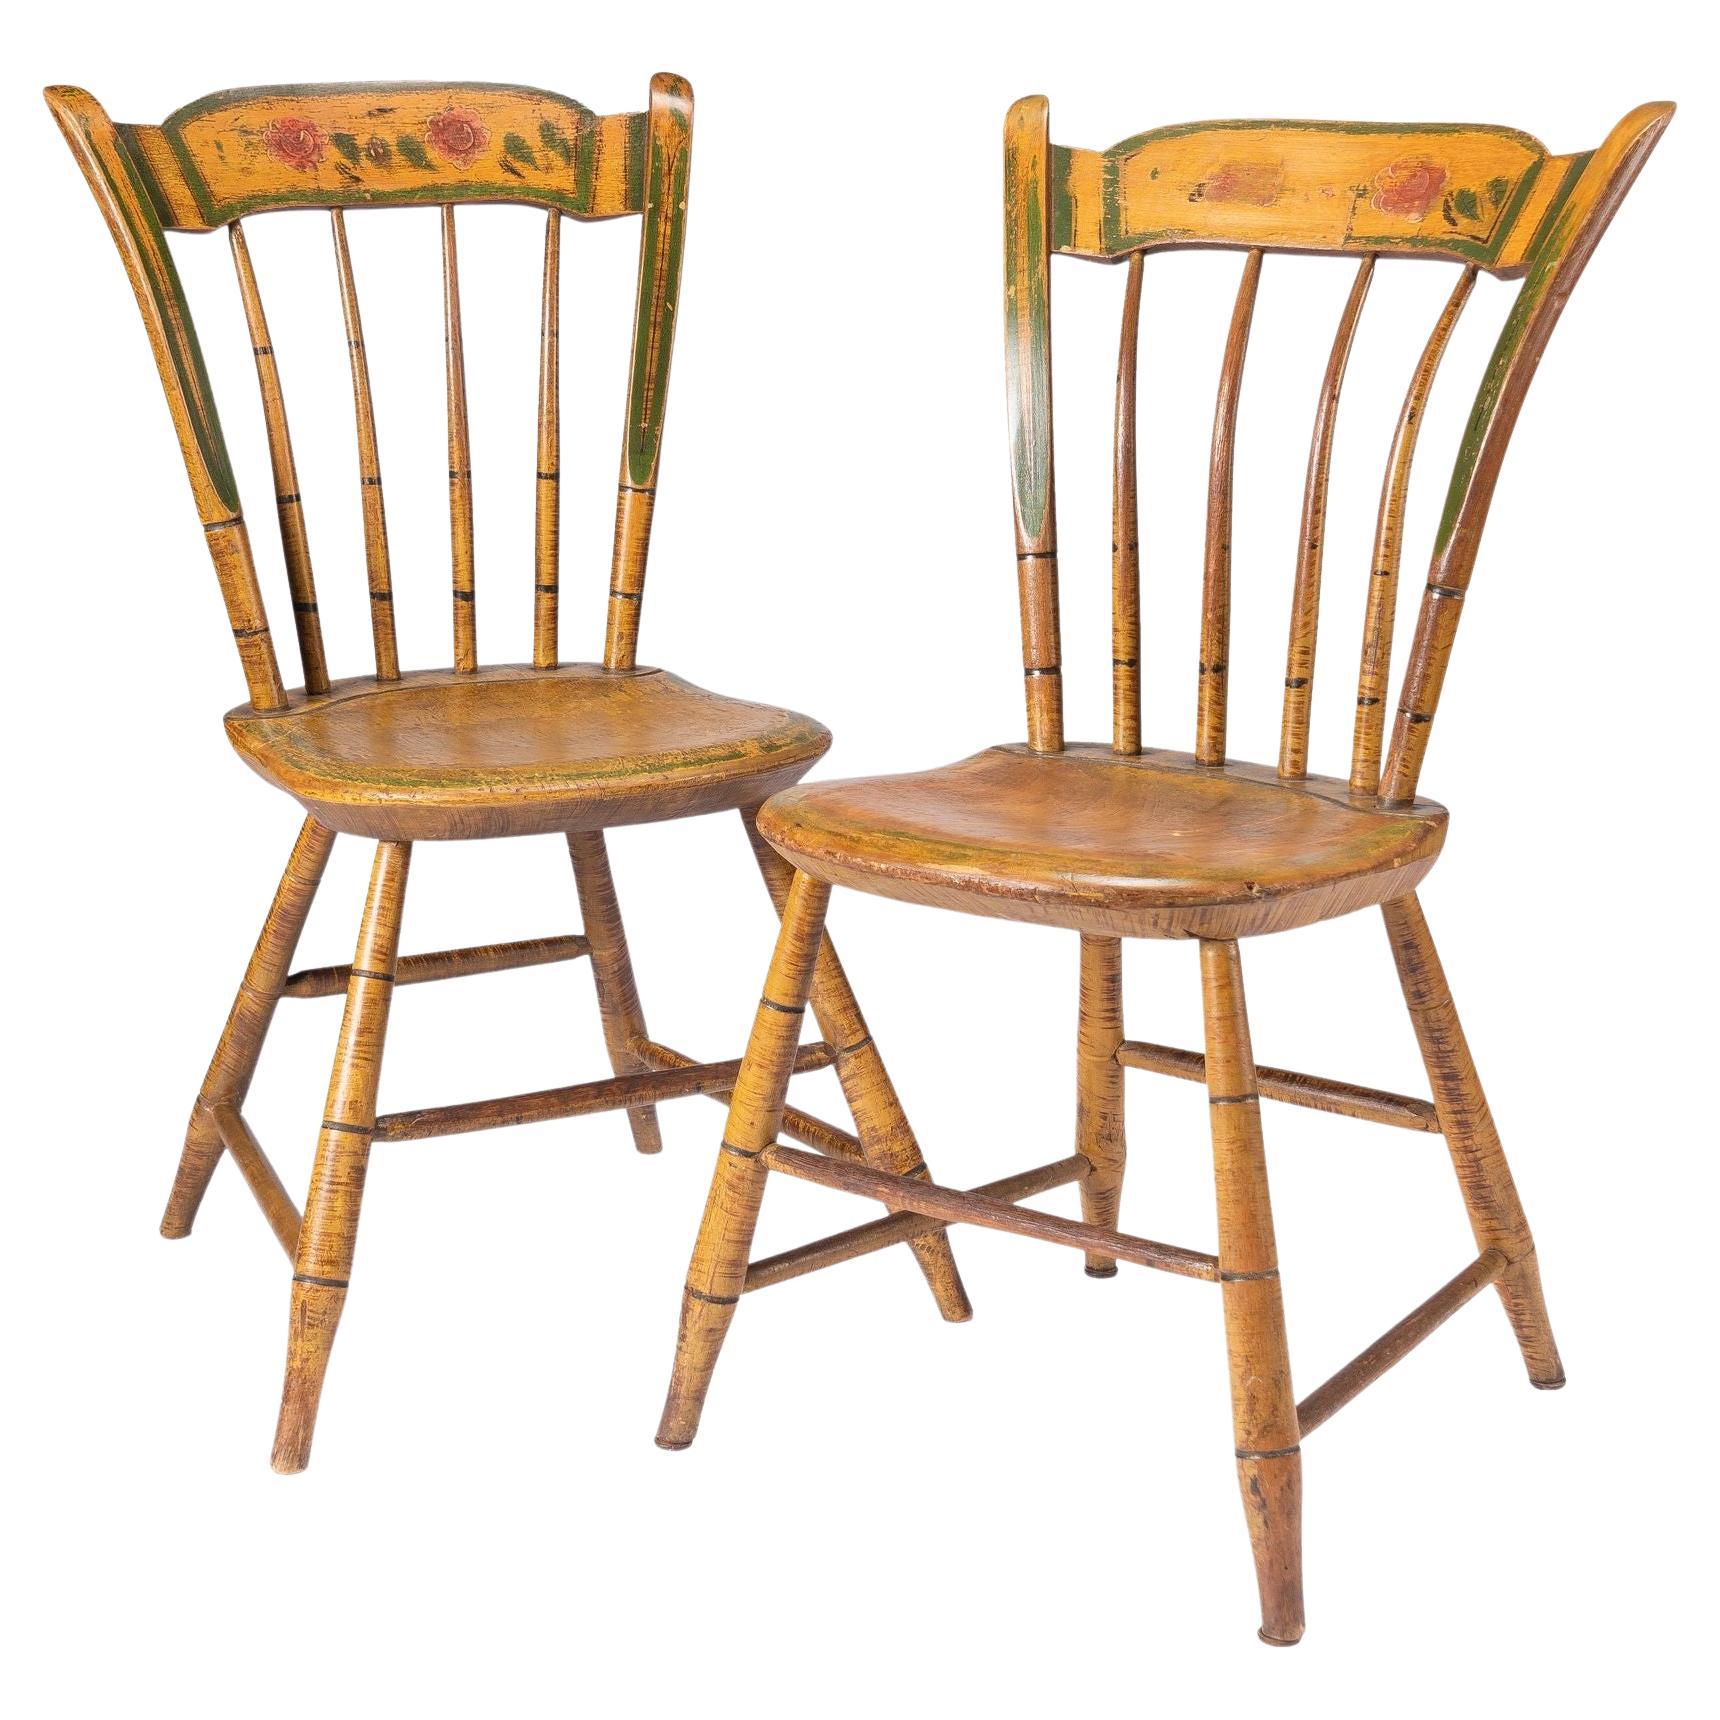 Pair of New England Painted Windsor Side Chairs, 1830-40